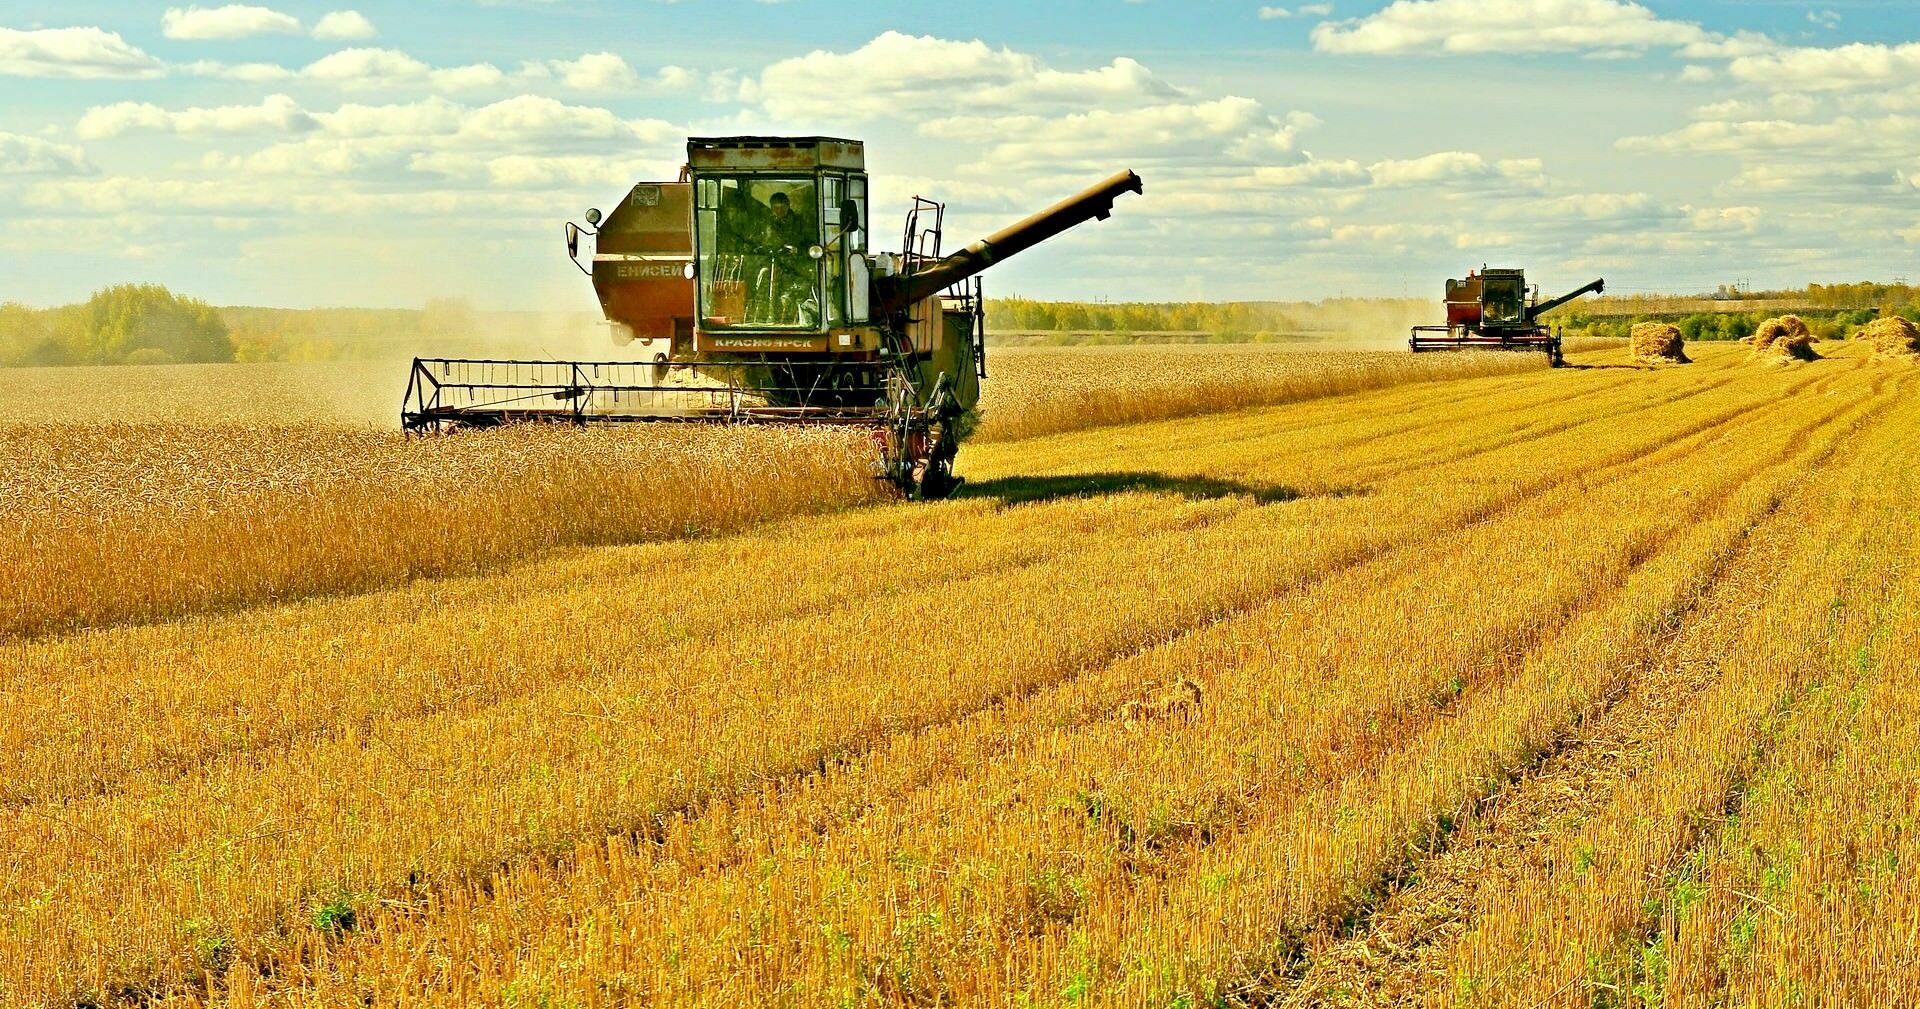 Russia was able to do what the USSR could not: grain yield in 2020 breaks all records